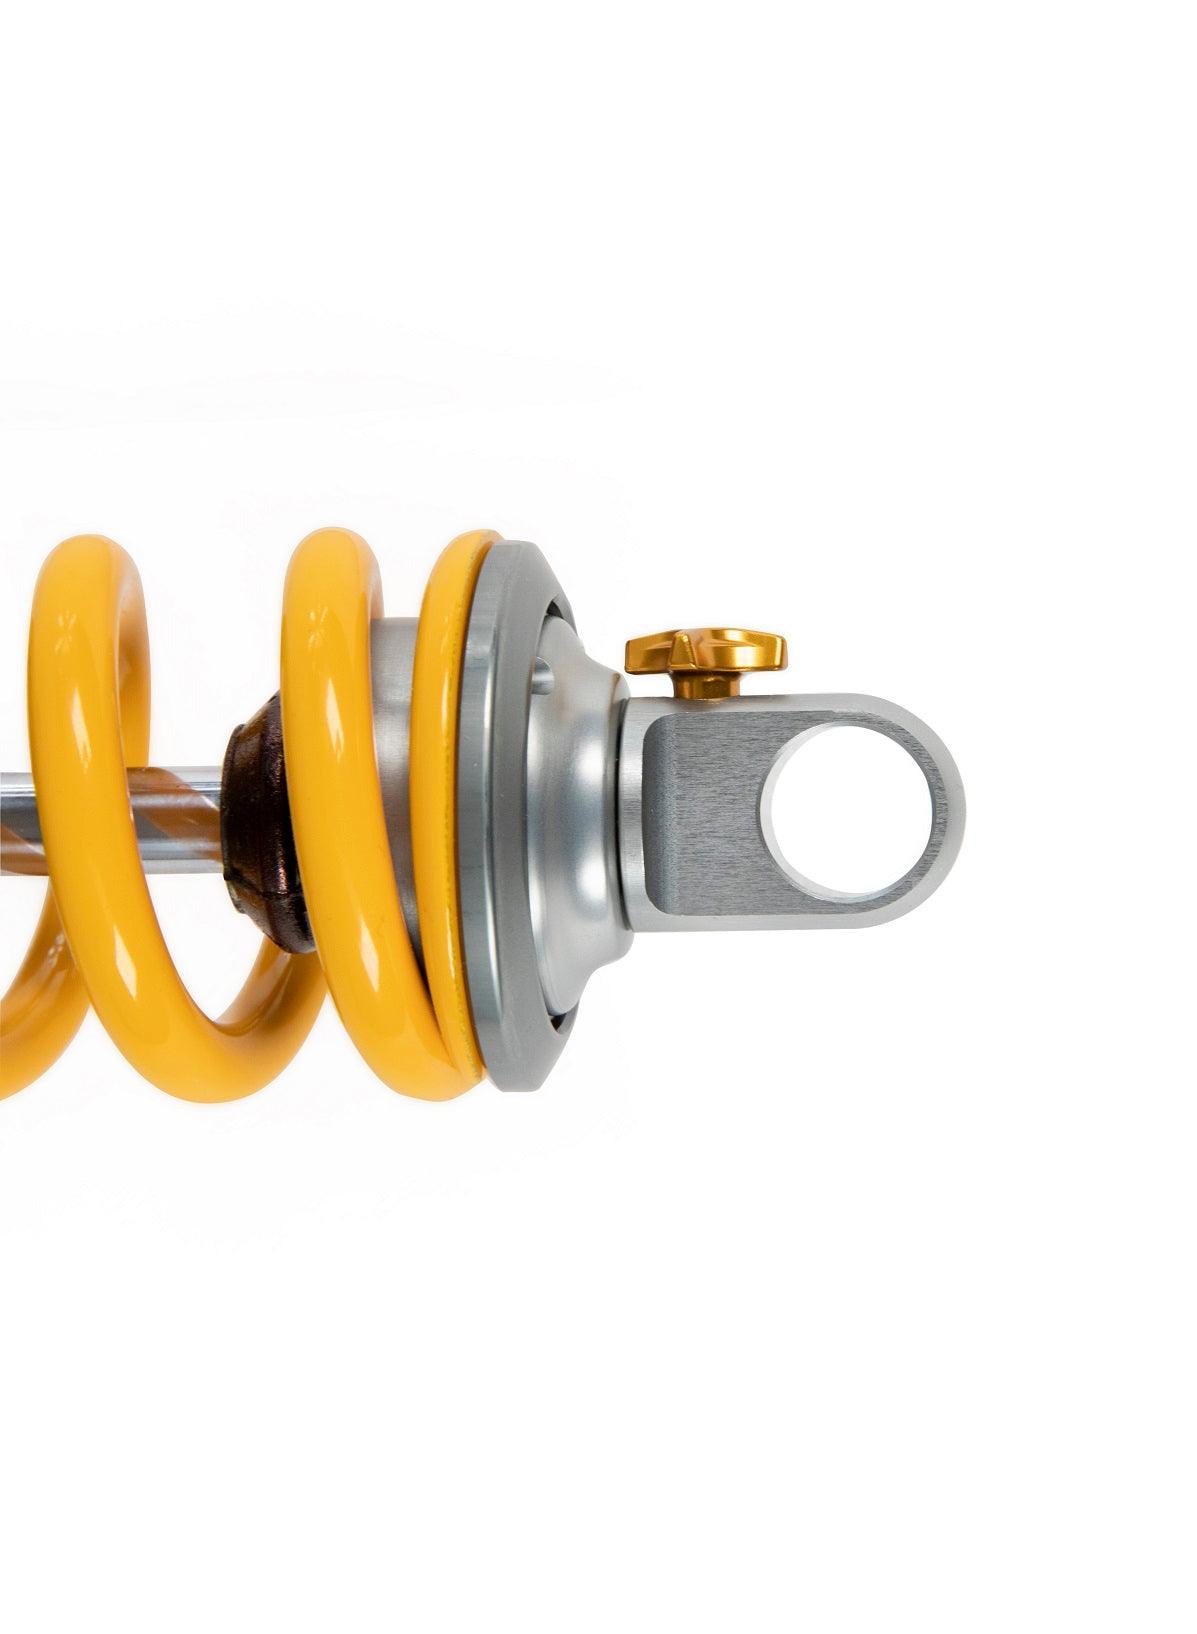 Öhlins TTX22m.2 (new side-by-side) - GAMUX